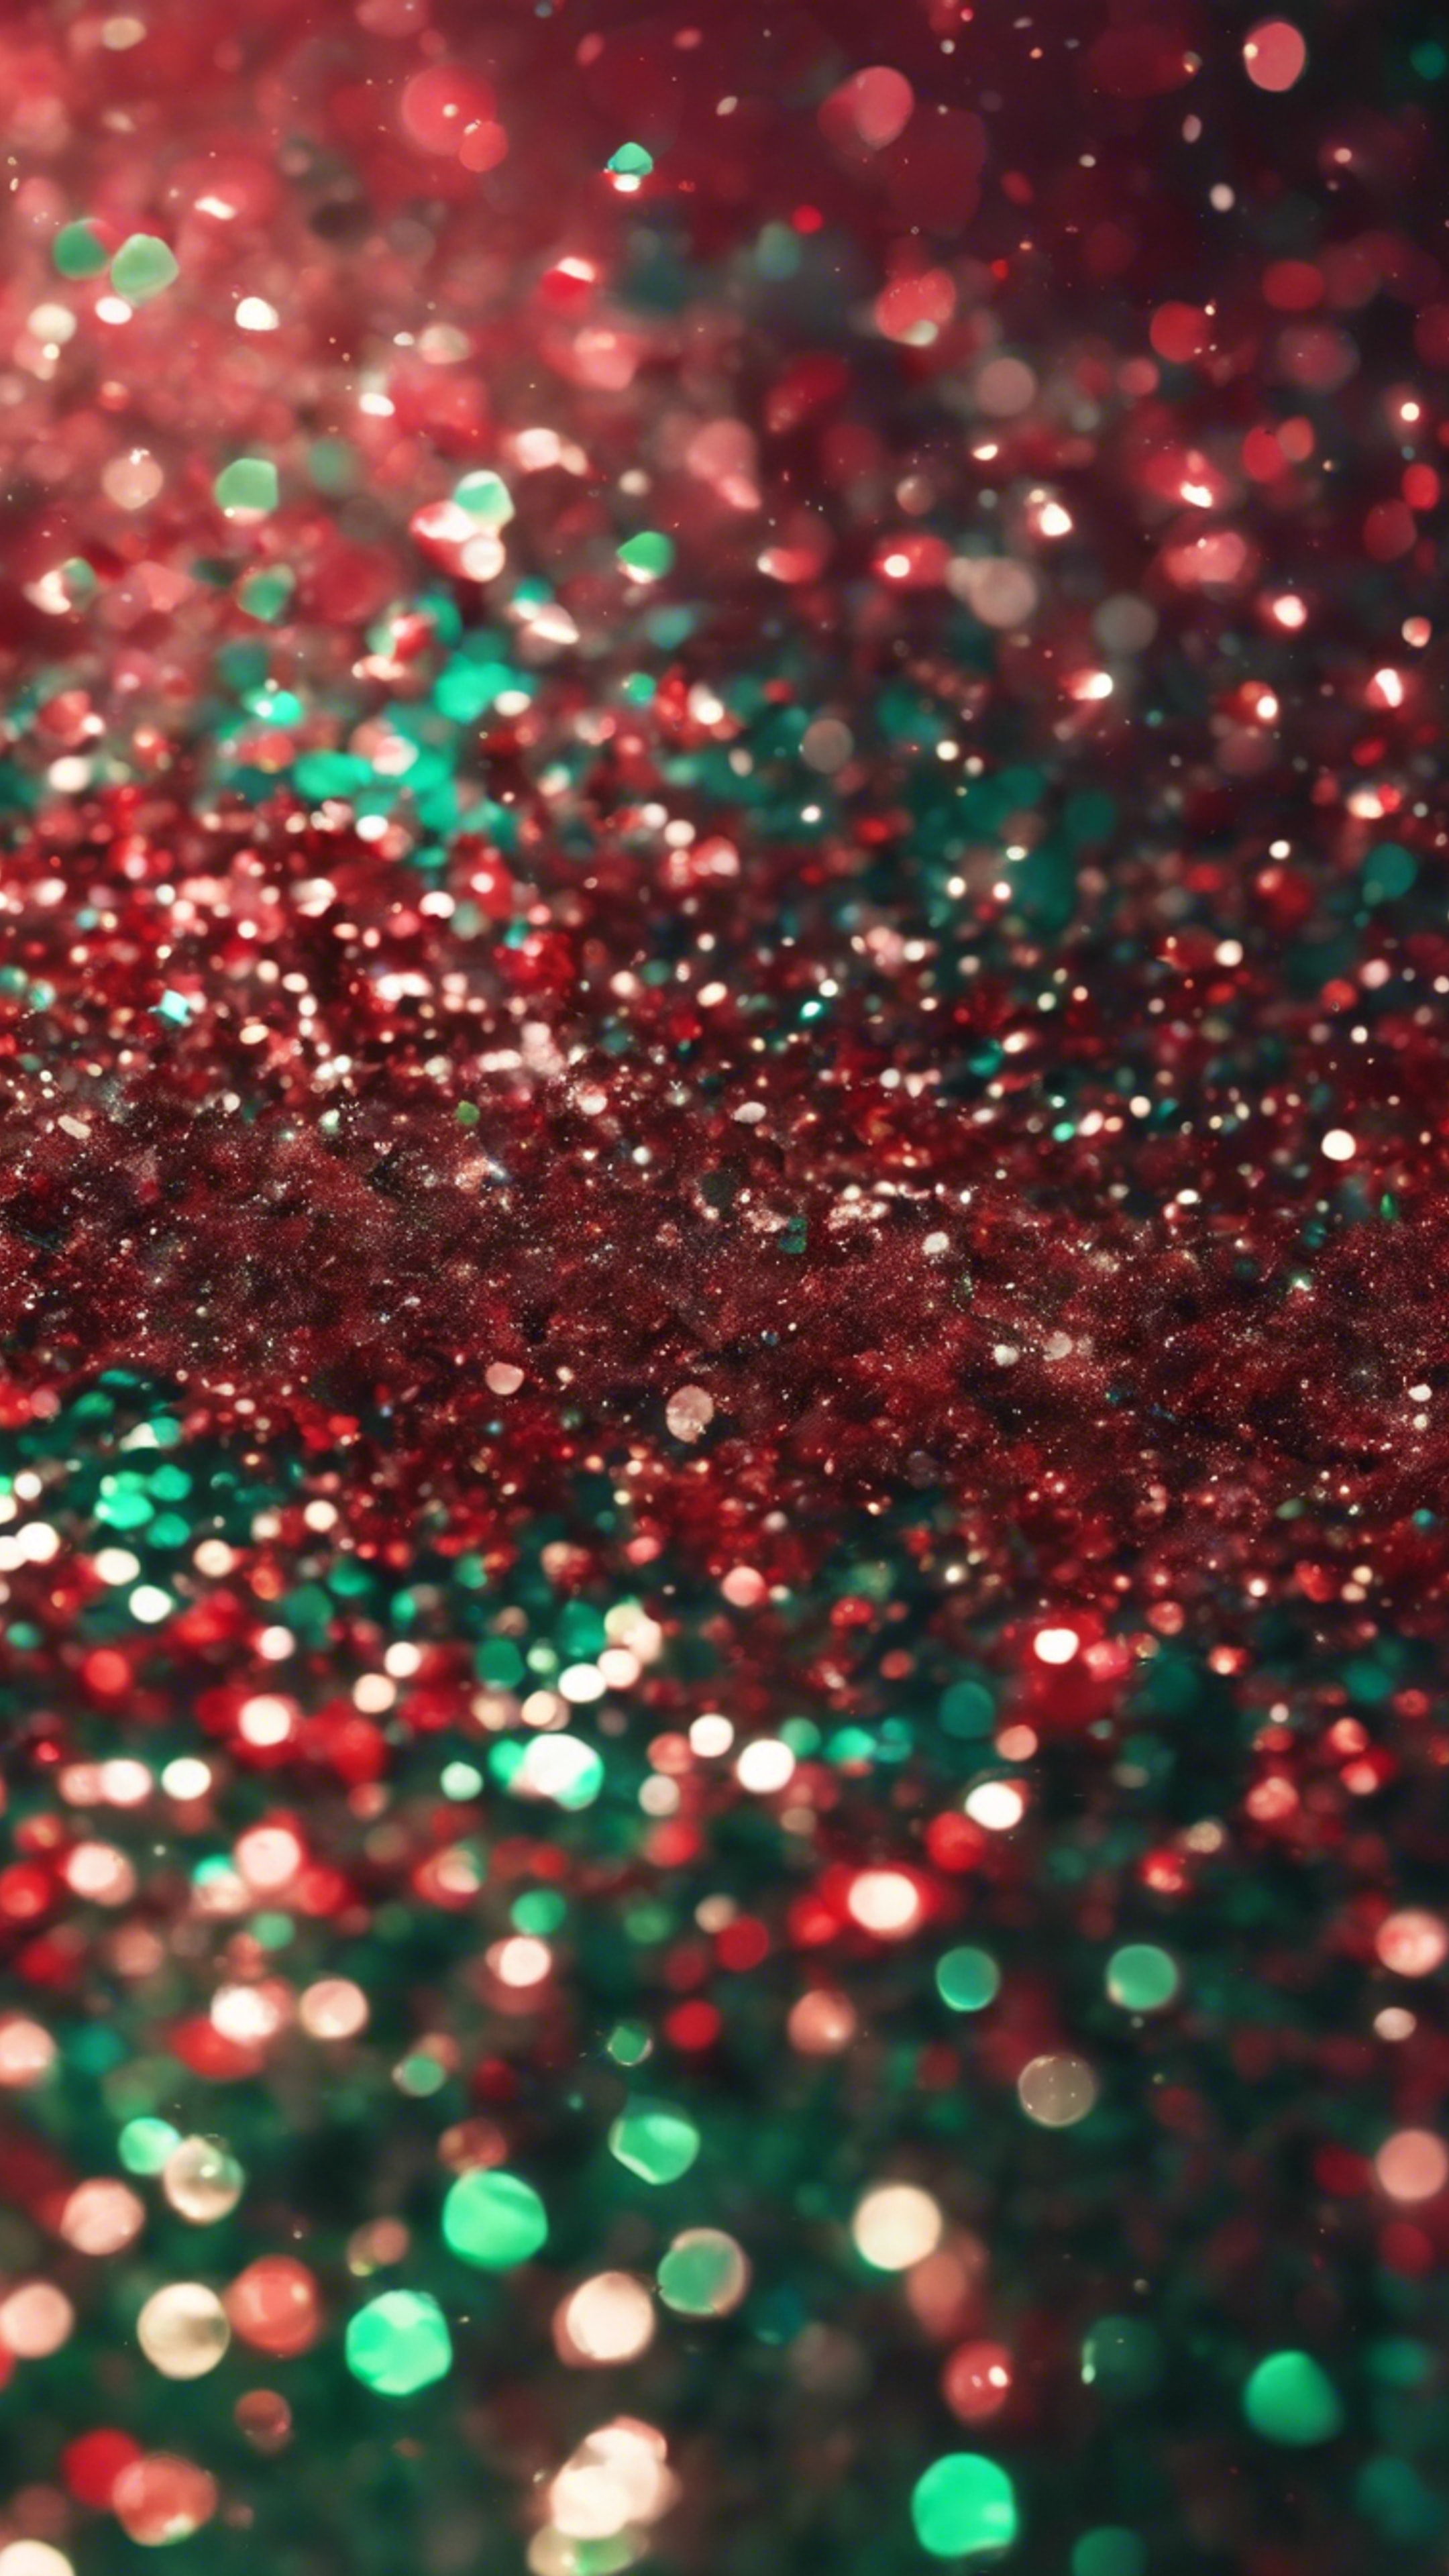 A mix of large and small particles of red and green glitter Kertas dinding[305fad2da0d041f9bf26]